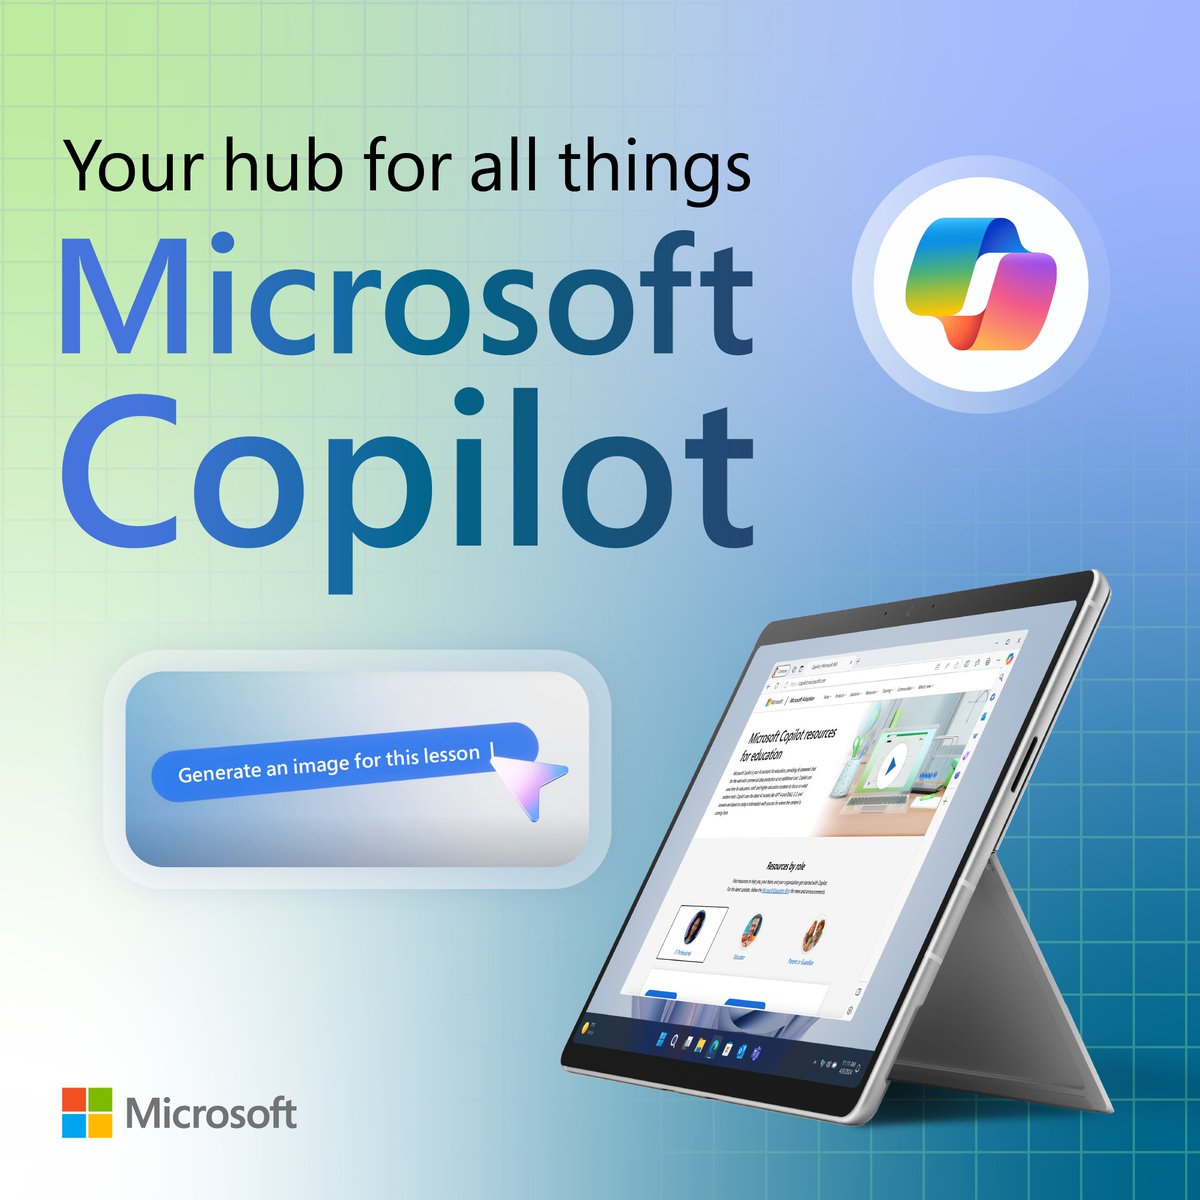 Ready to explore Microsoft Copilot but don’t know where to start? 🤔 From in-depth video tutorials to quick guides, explore resources all in one place: msft.it/6013YkxmP #MicrosoftEDU #AI